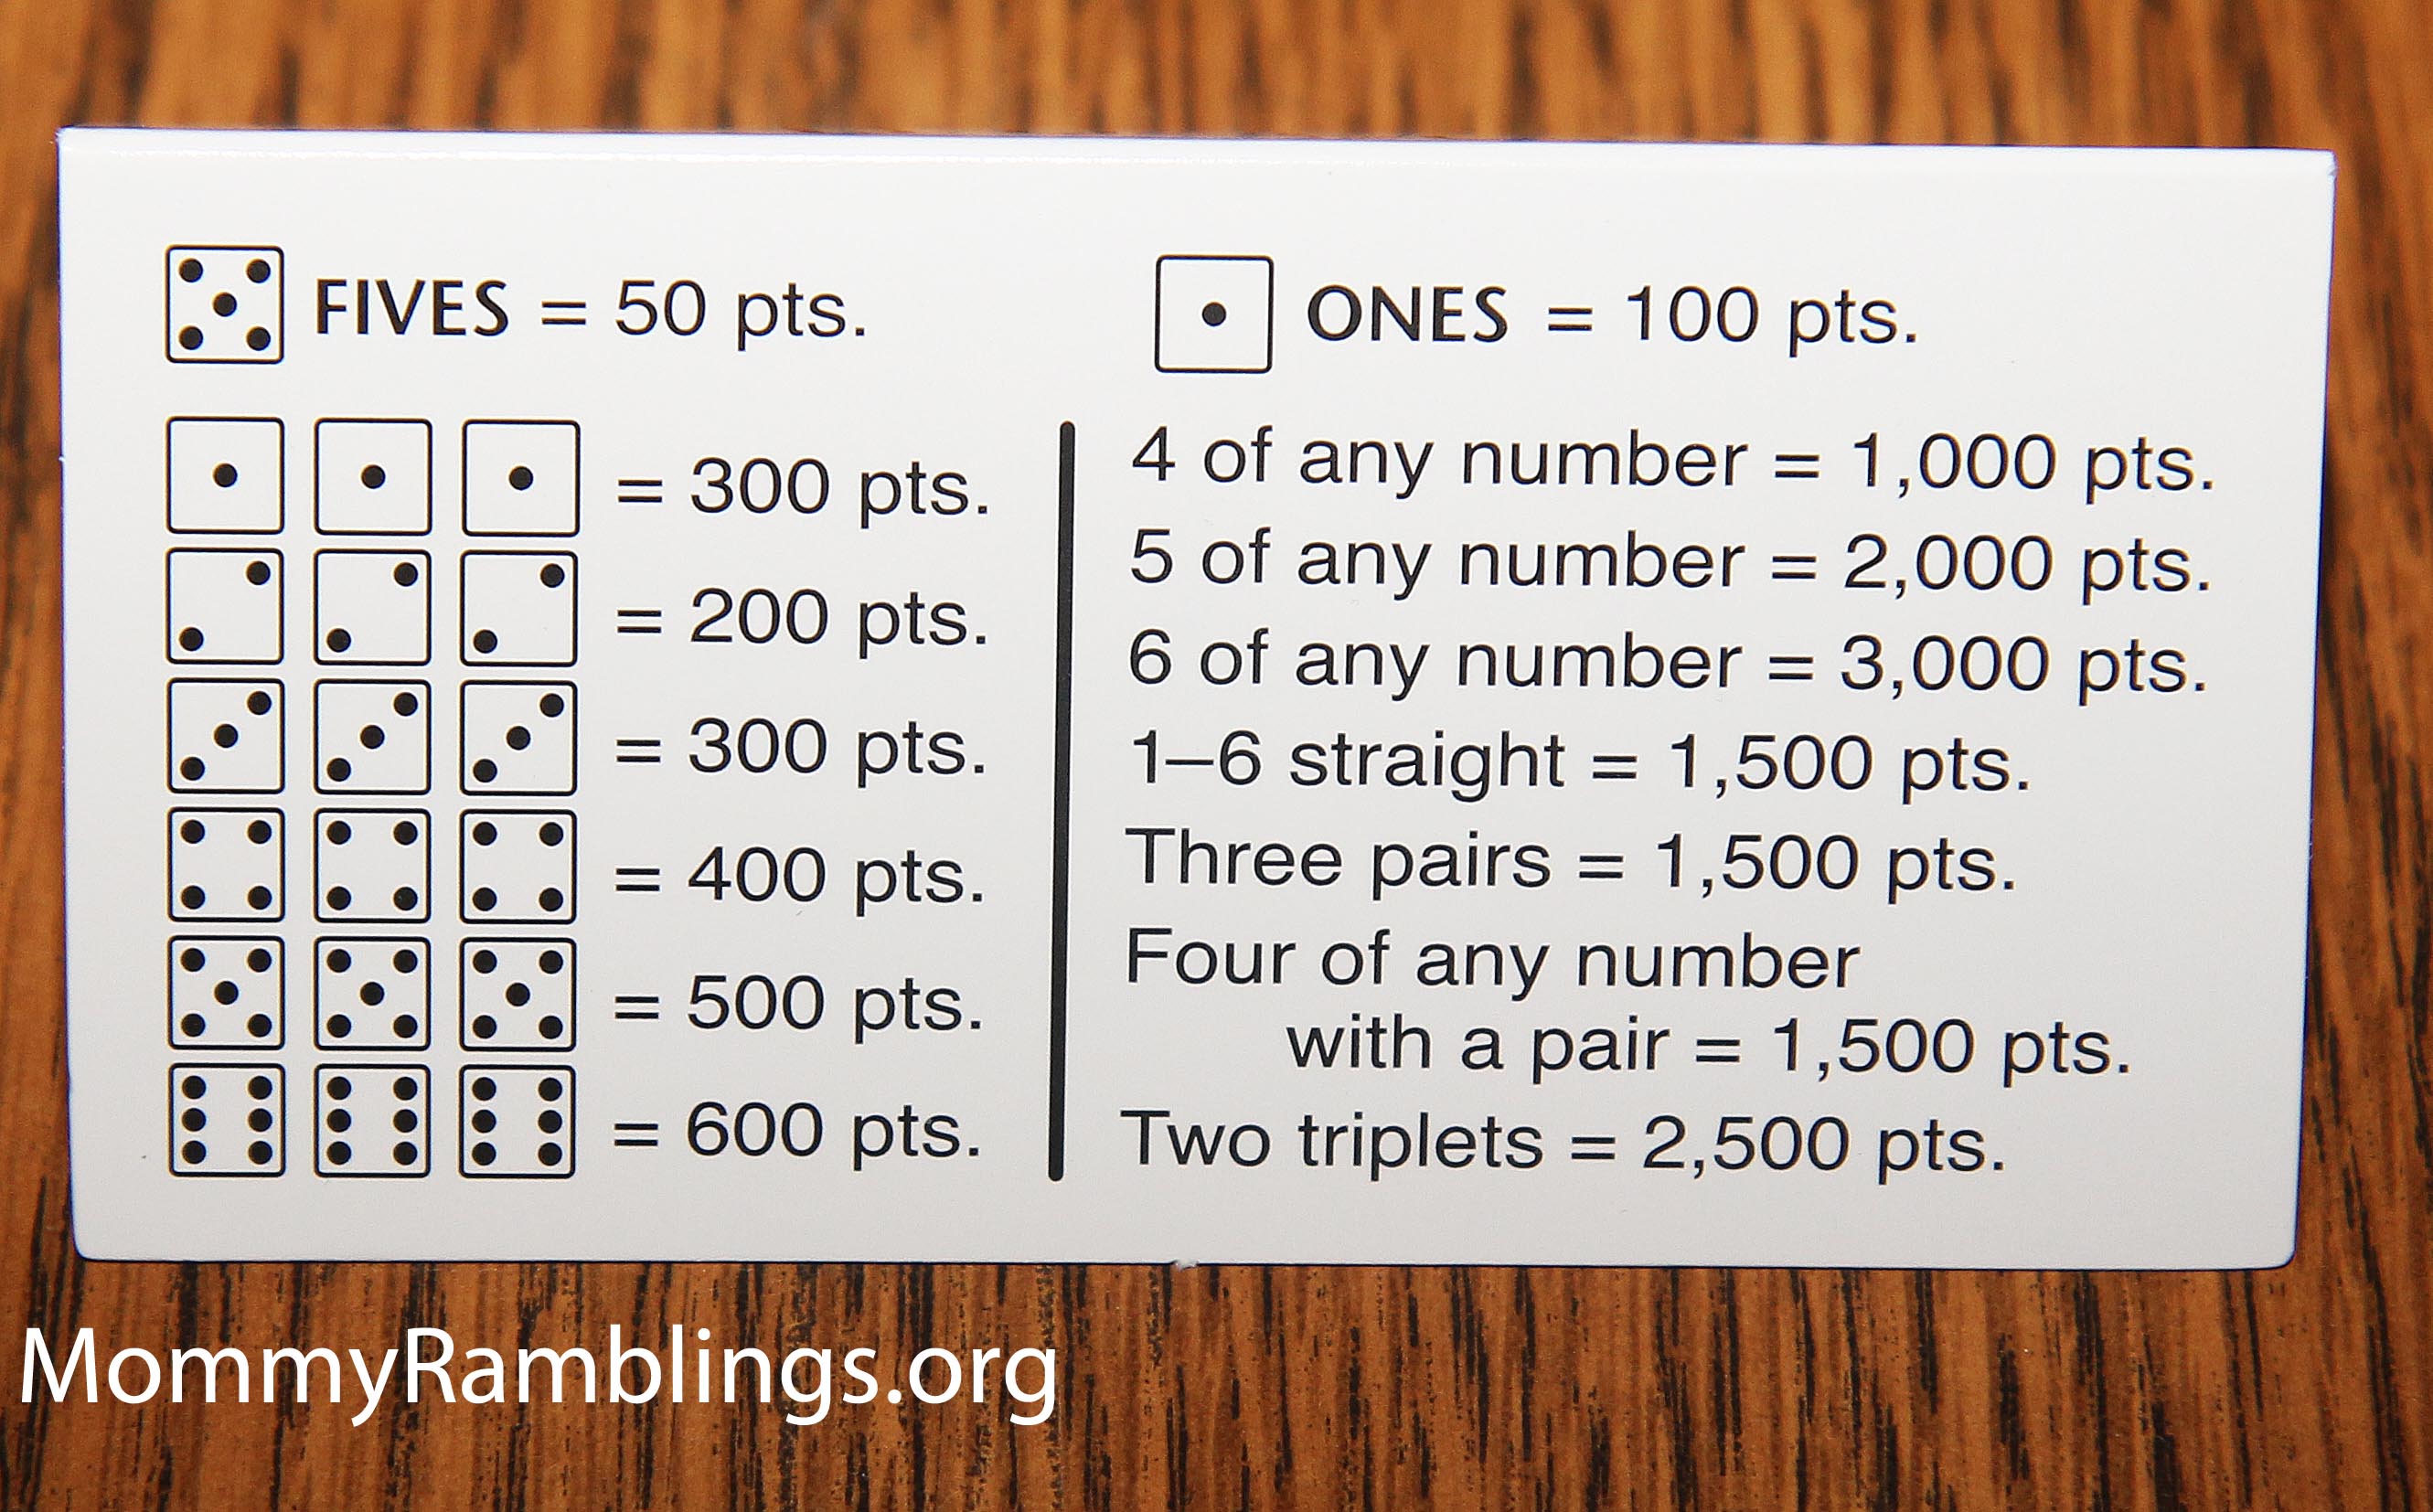 Can you find a printable list of Farkle rules online?